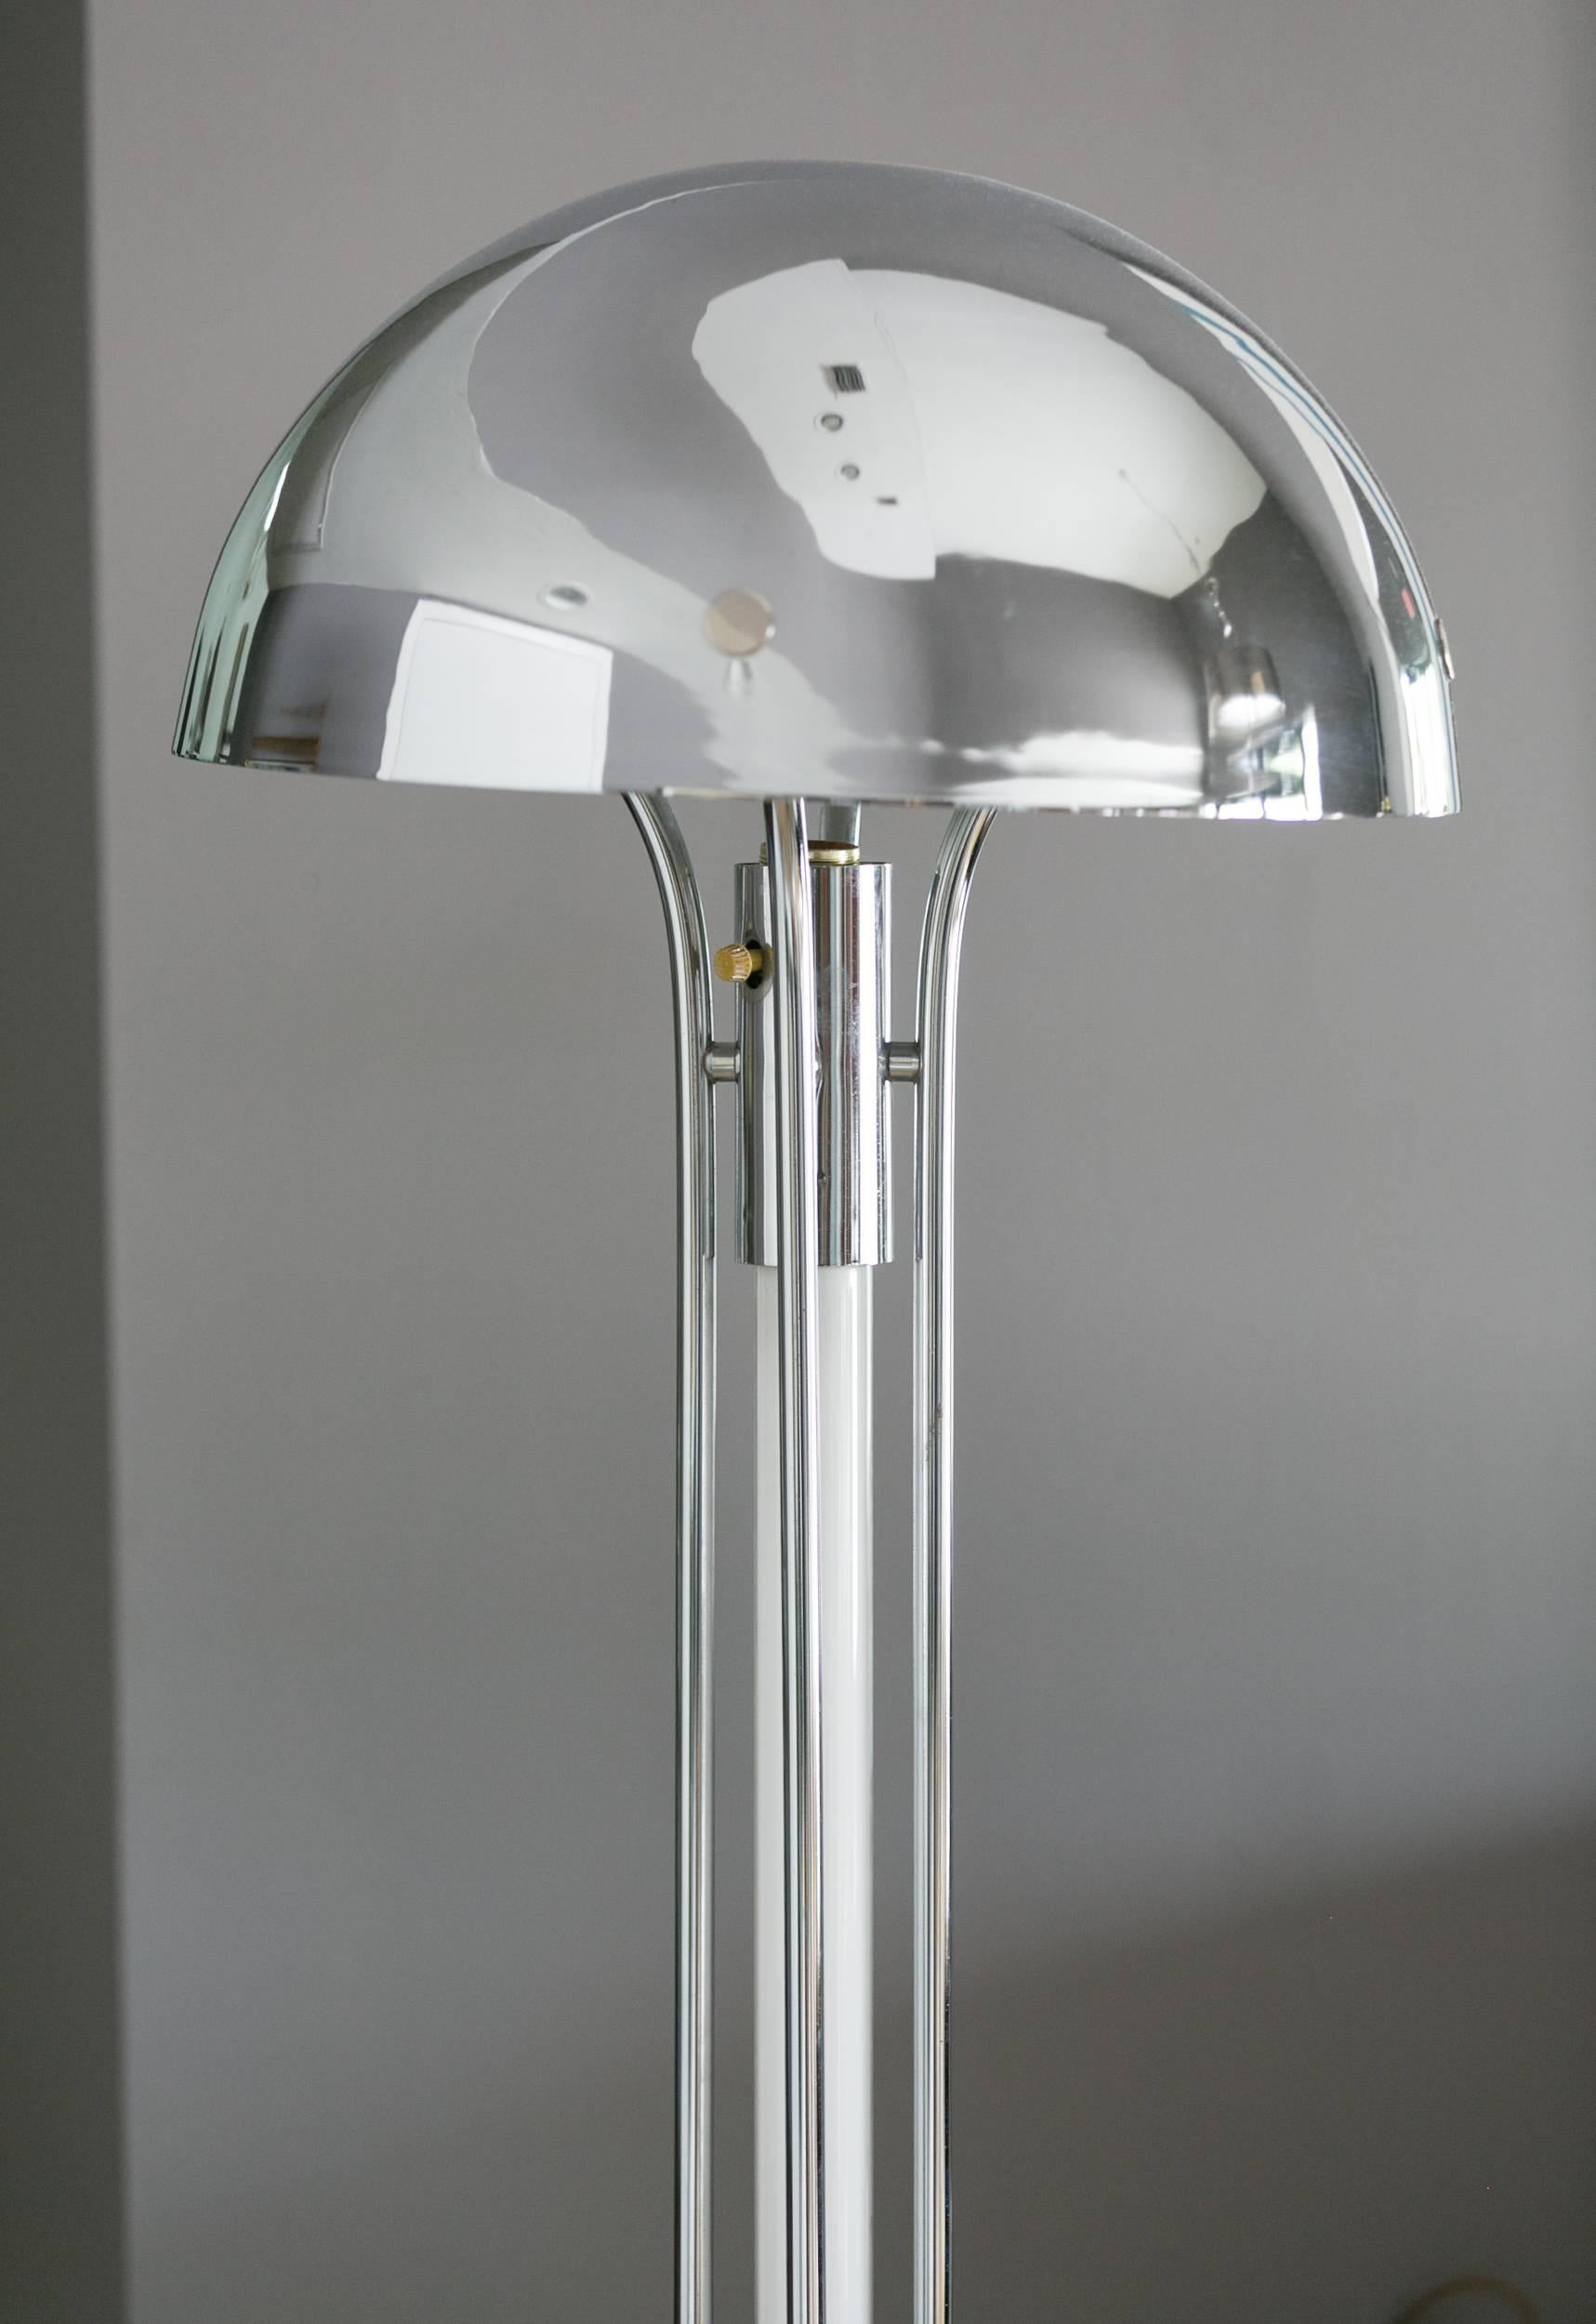 Chrome floor lamp in Jaques Adnet style
with vertical tube ilumination stem supporting.
Dome shaped shade with brass details,
powder coated reflective inside.